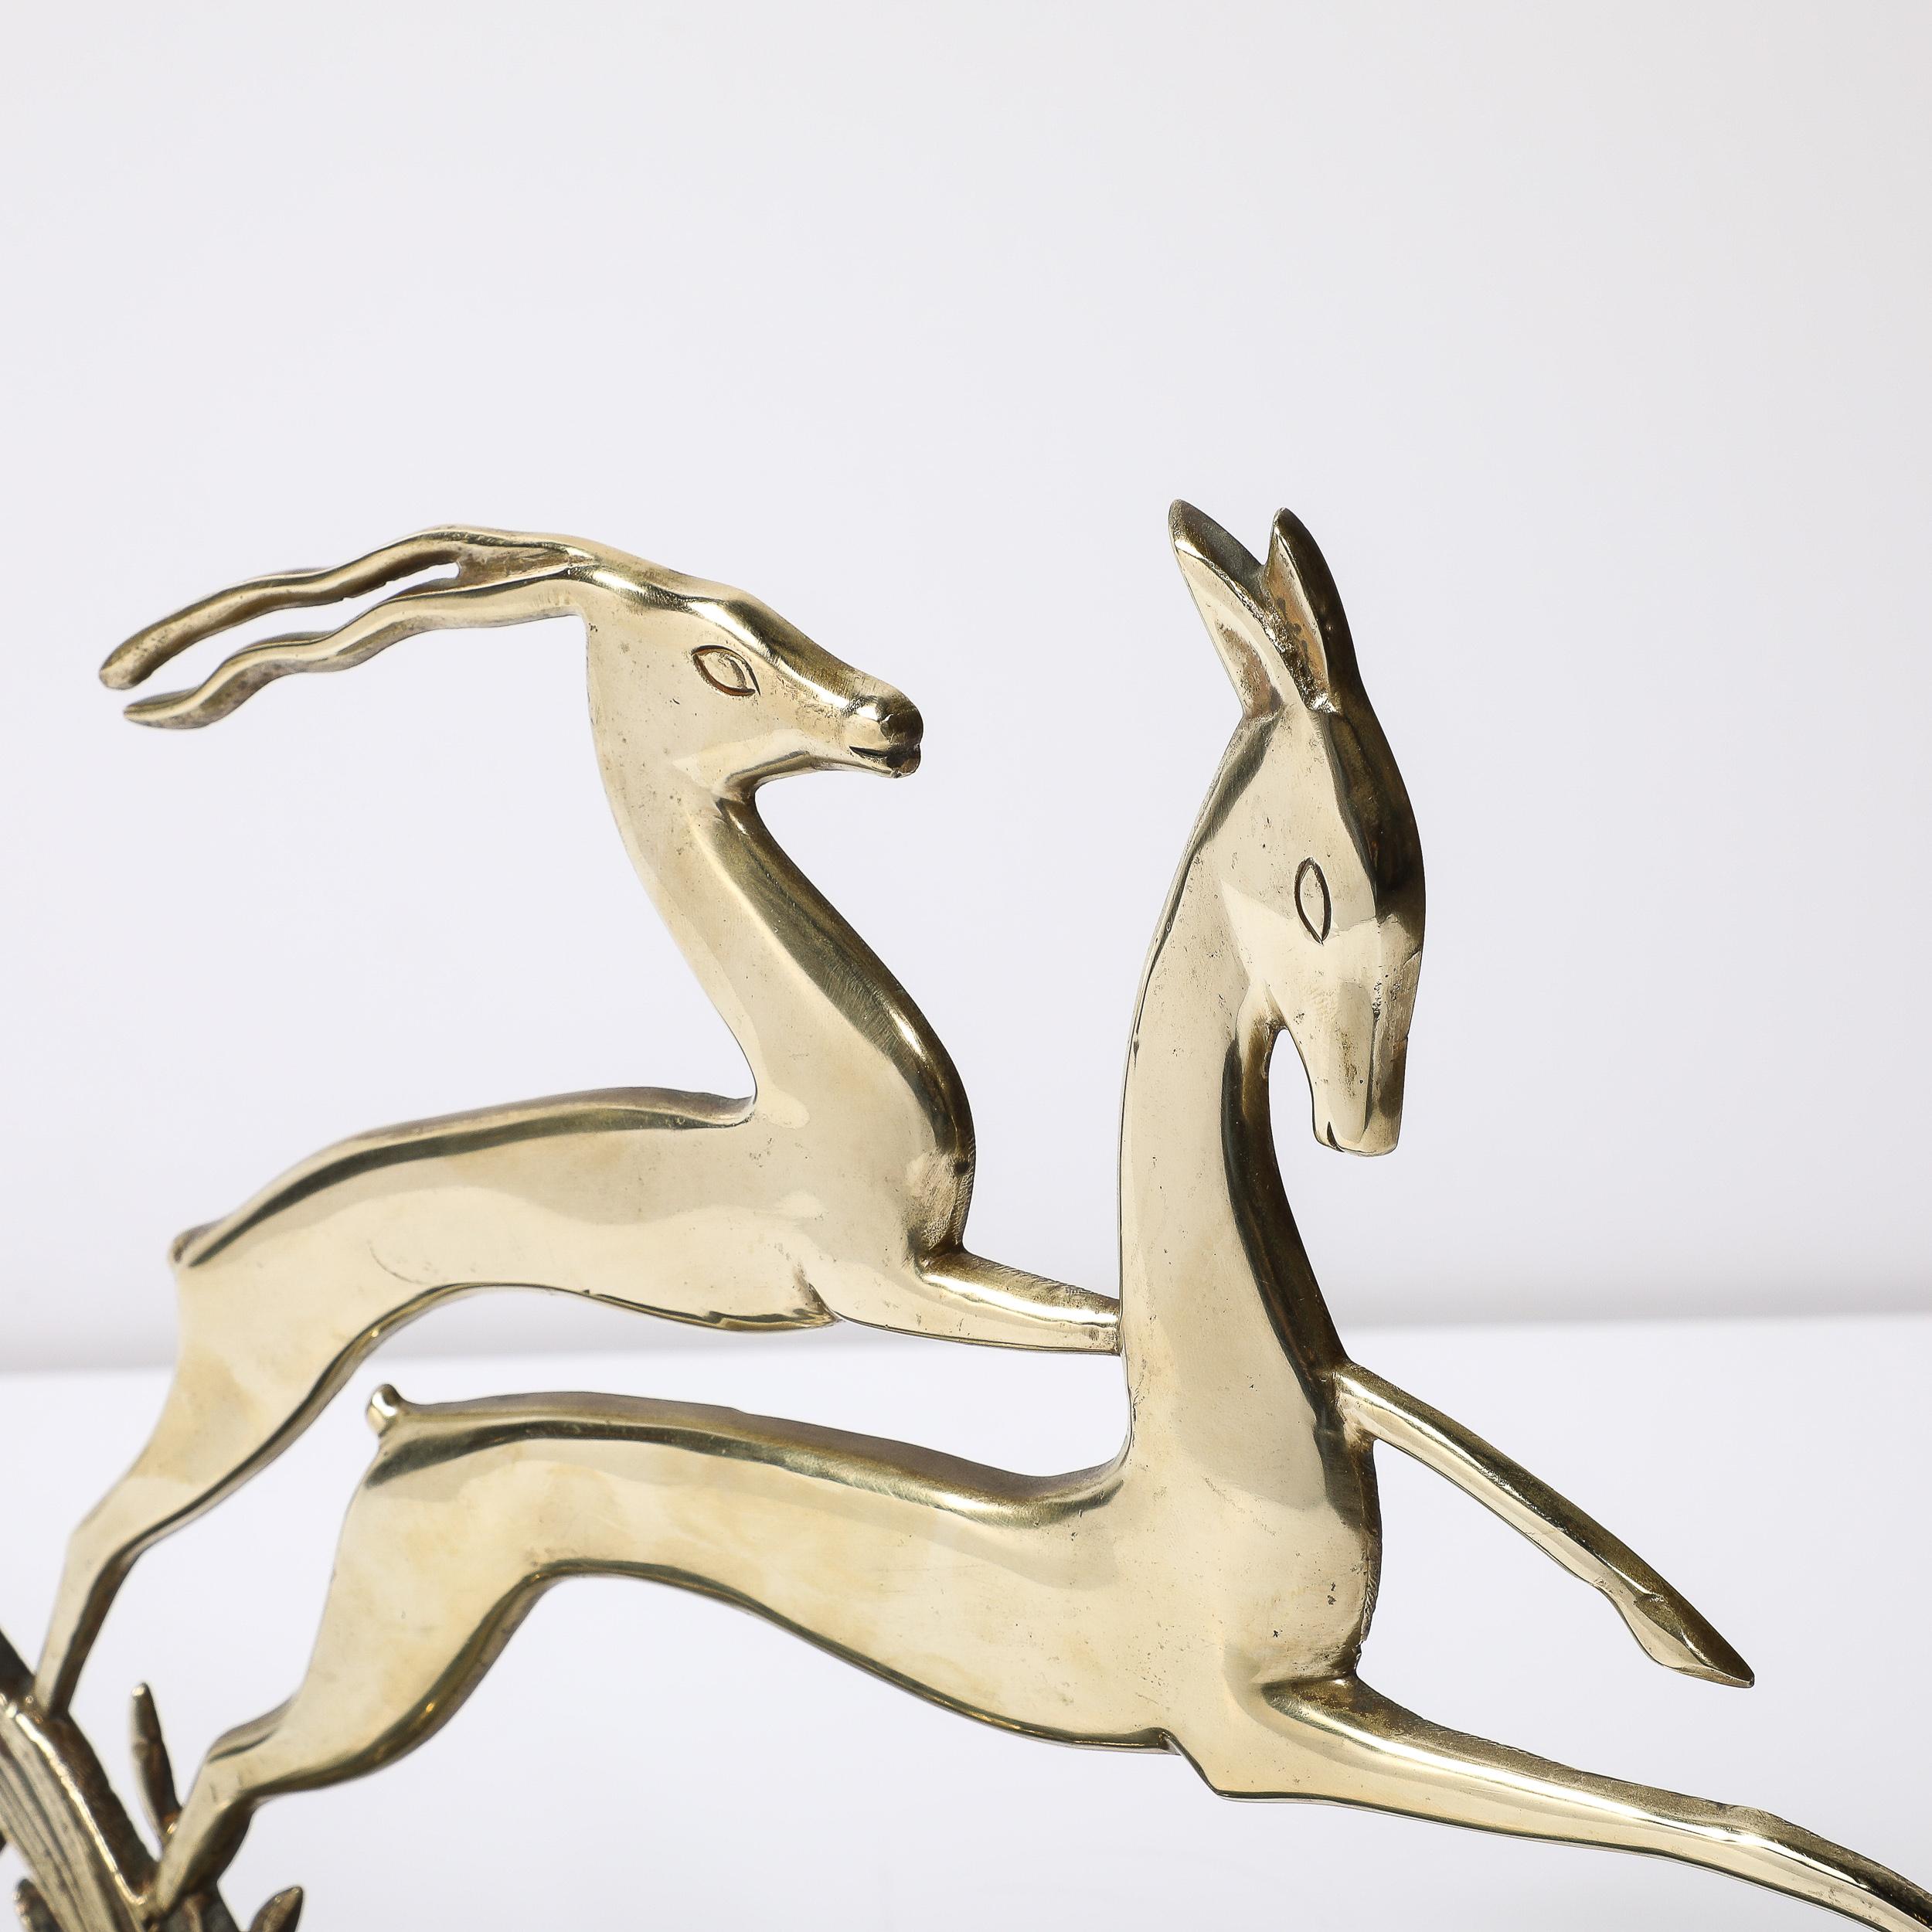 Art Deco Leaping Gazelle Sculpture in Polished Brass on Black Marble Base For Sale 1